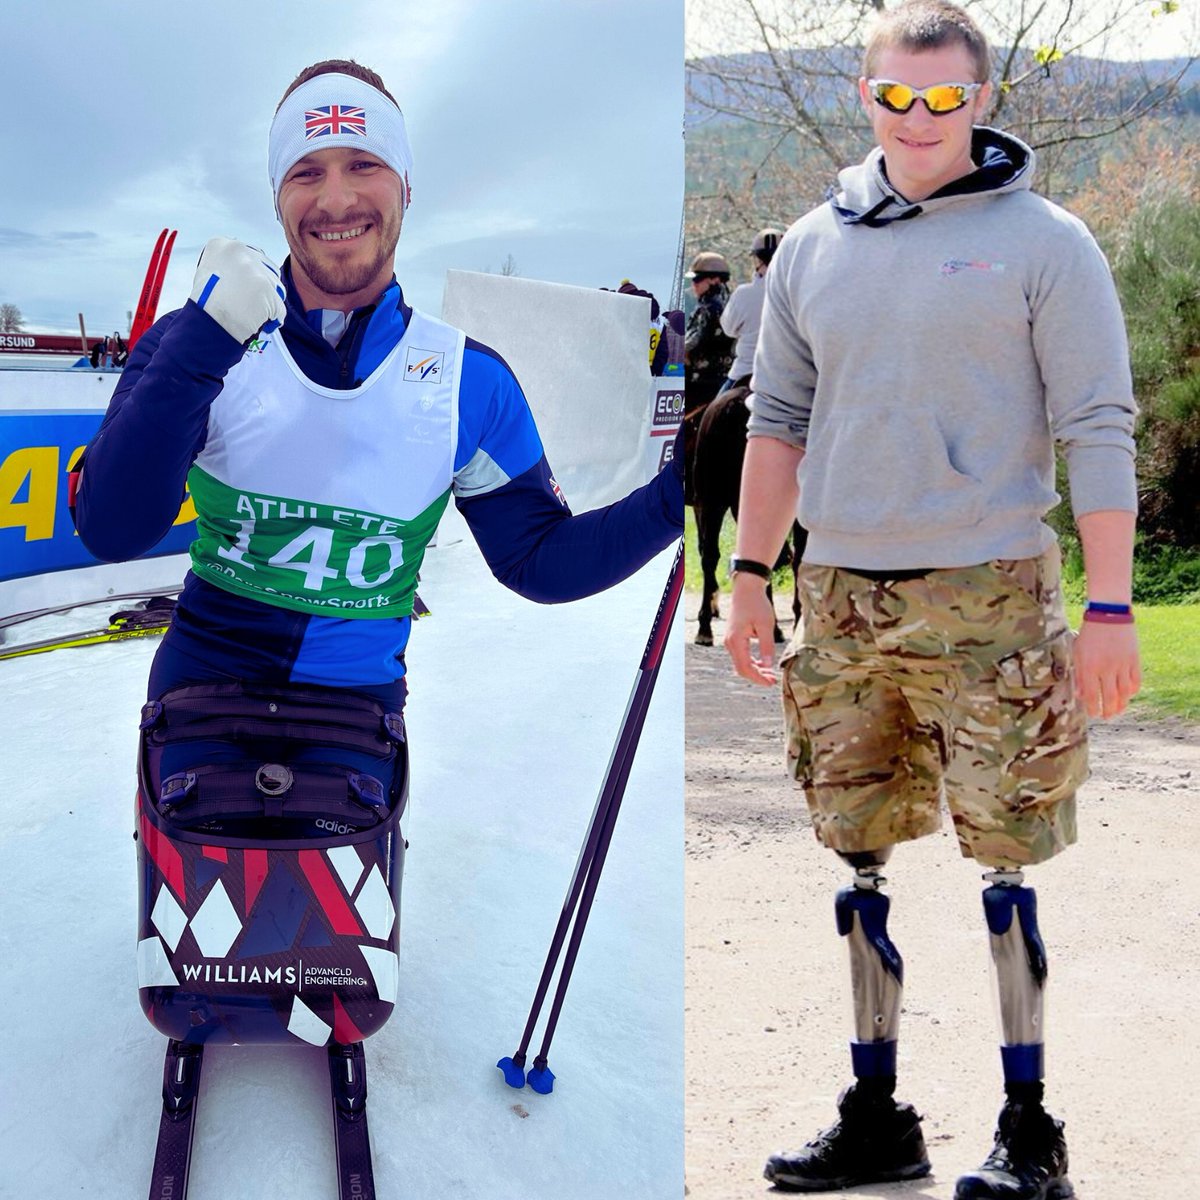 Congratulation to Blesma Member Scott Meenagh on winning 'Inspiration of the Year' at the Scottish Veterans Awards. Aged just 21, Scott lost both his legs whilst serving in Afghanistan. He has gone on to achieve amazing things in the world of winter sports.